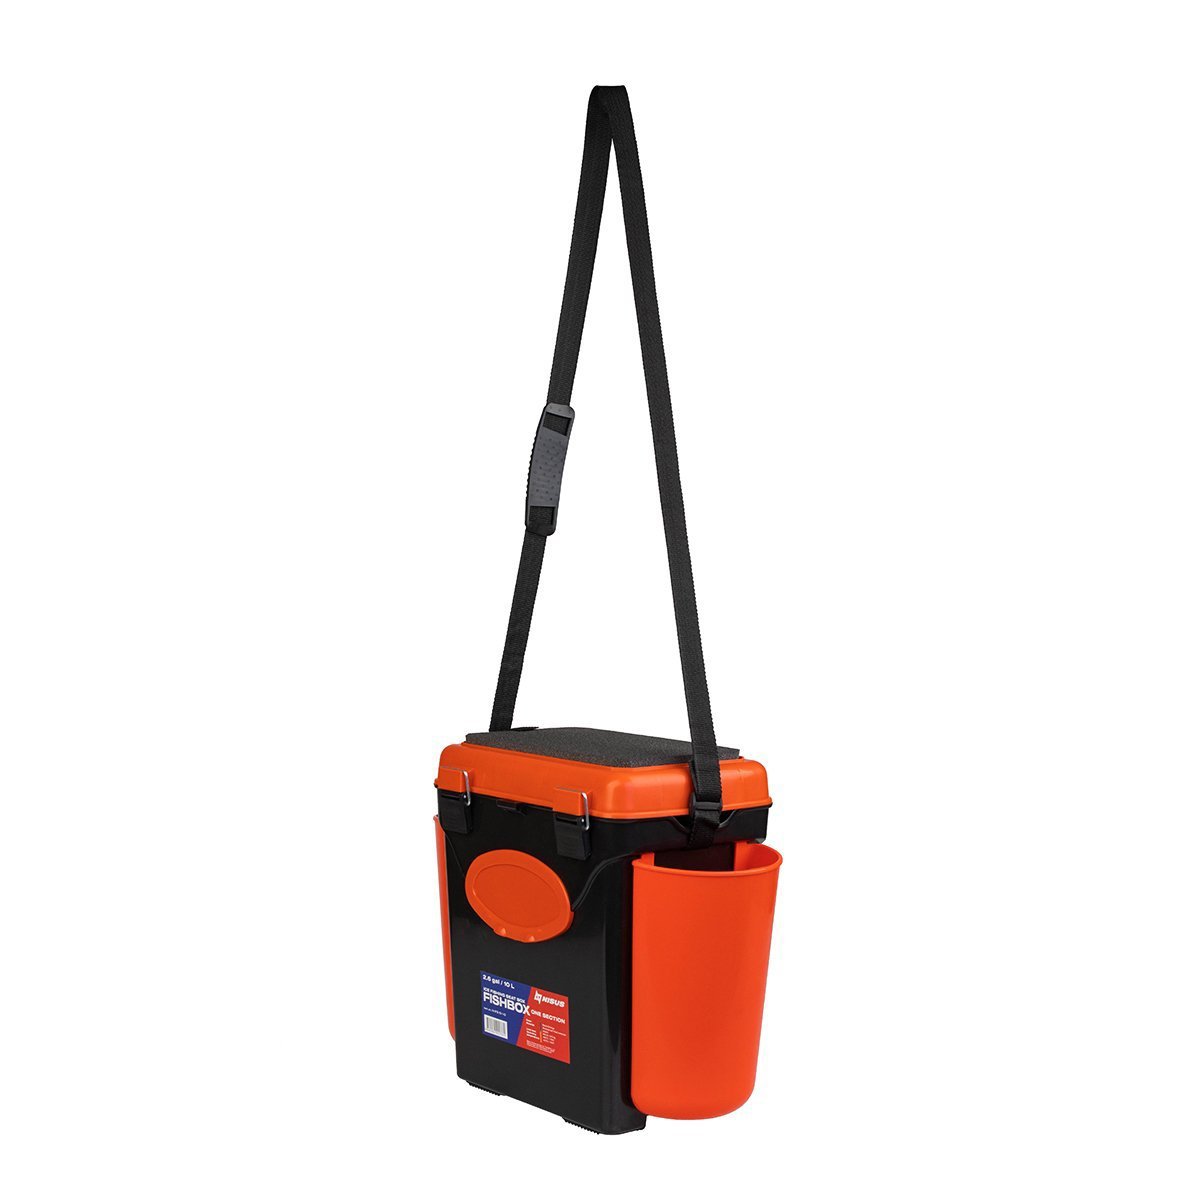 FishBox 10 liter SeatBox for Ice Fishing Tackle and Gear, orange